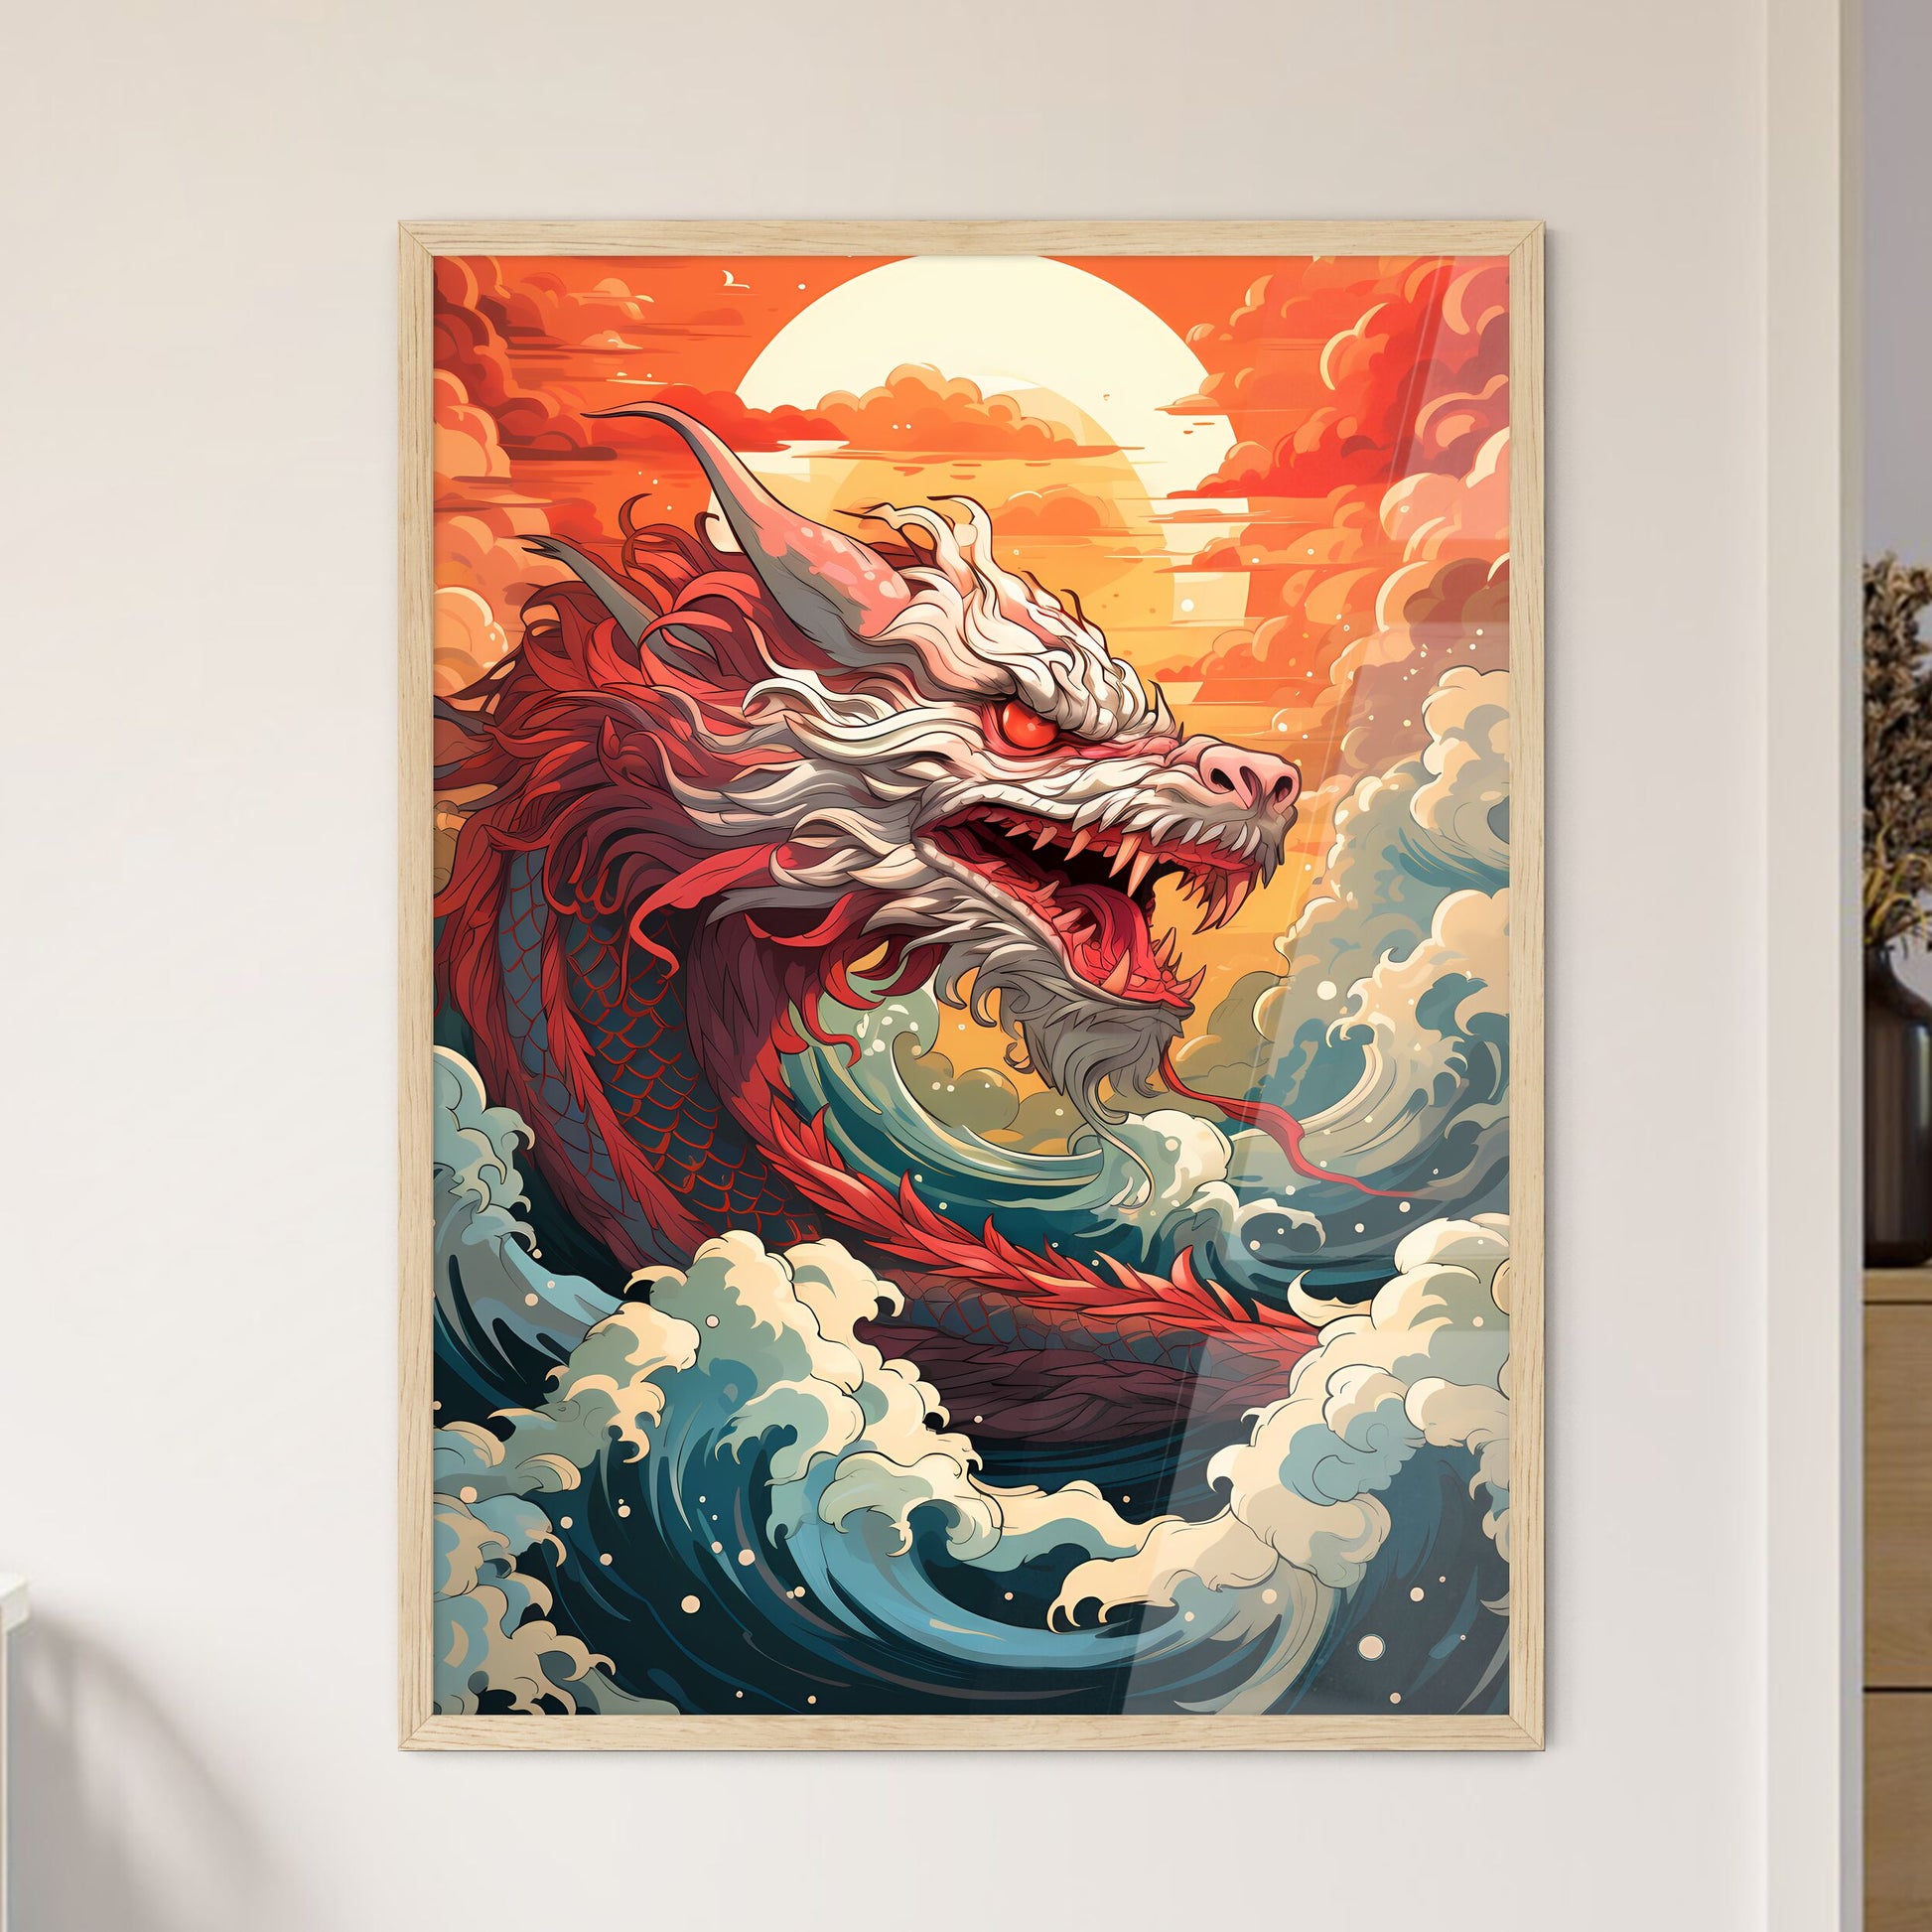 A Red Dragon With White And Red Waves Default Title